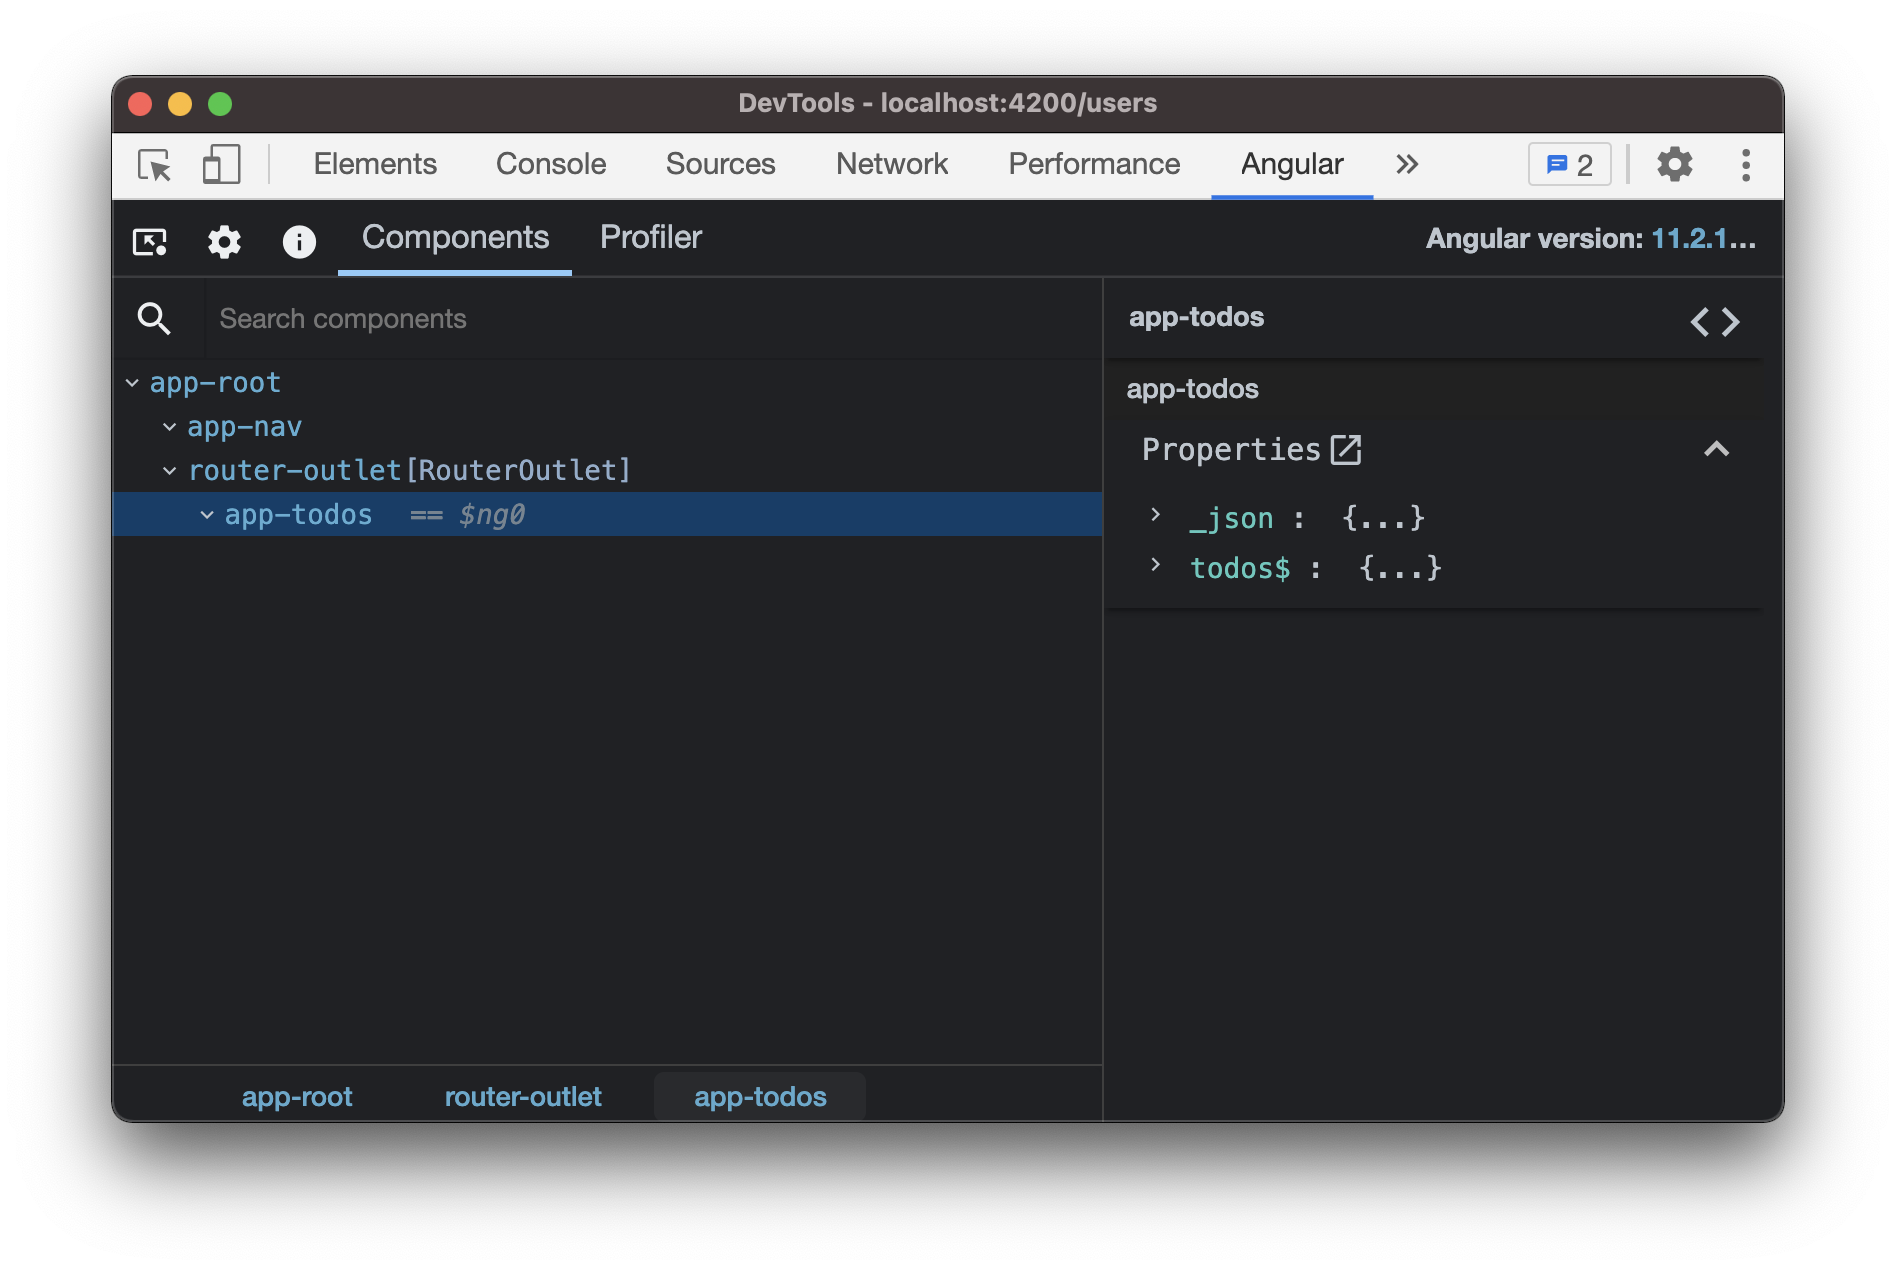 Angular dev tools showing the app-todos component